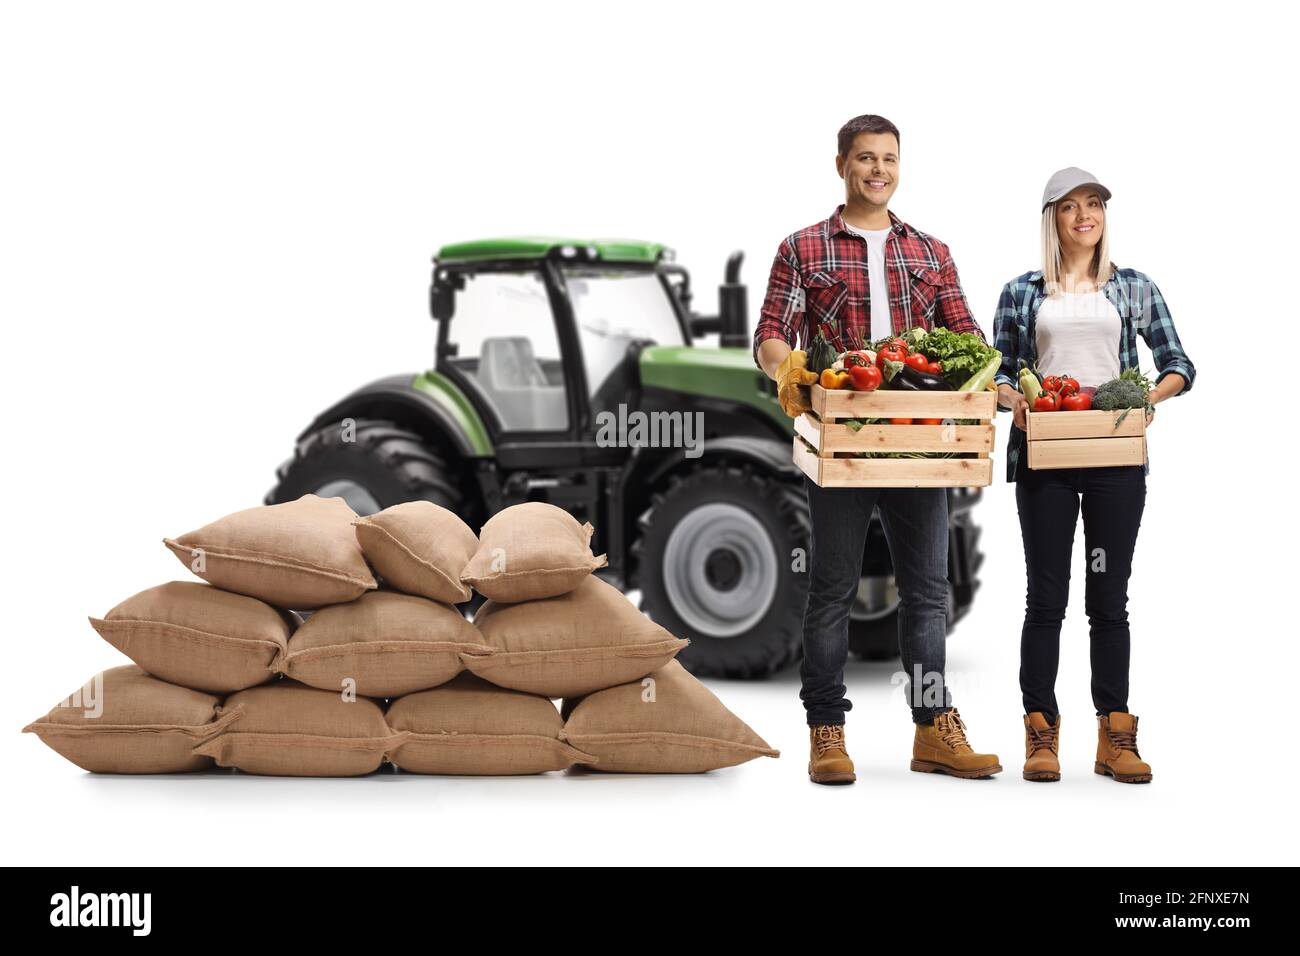 Young farmers carrying crates with vegetables and posing in front of a tractor isolated on white background Stock Photo